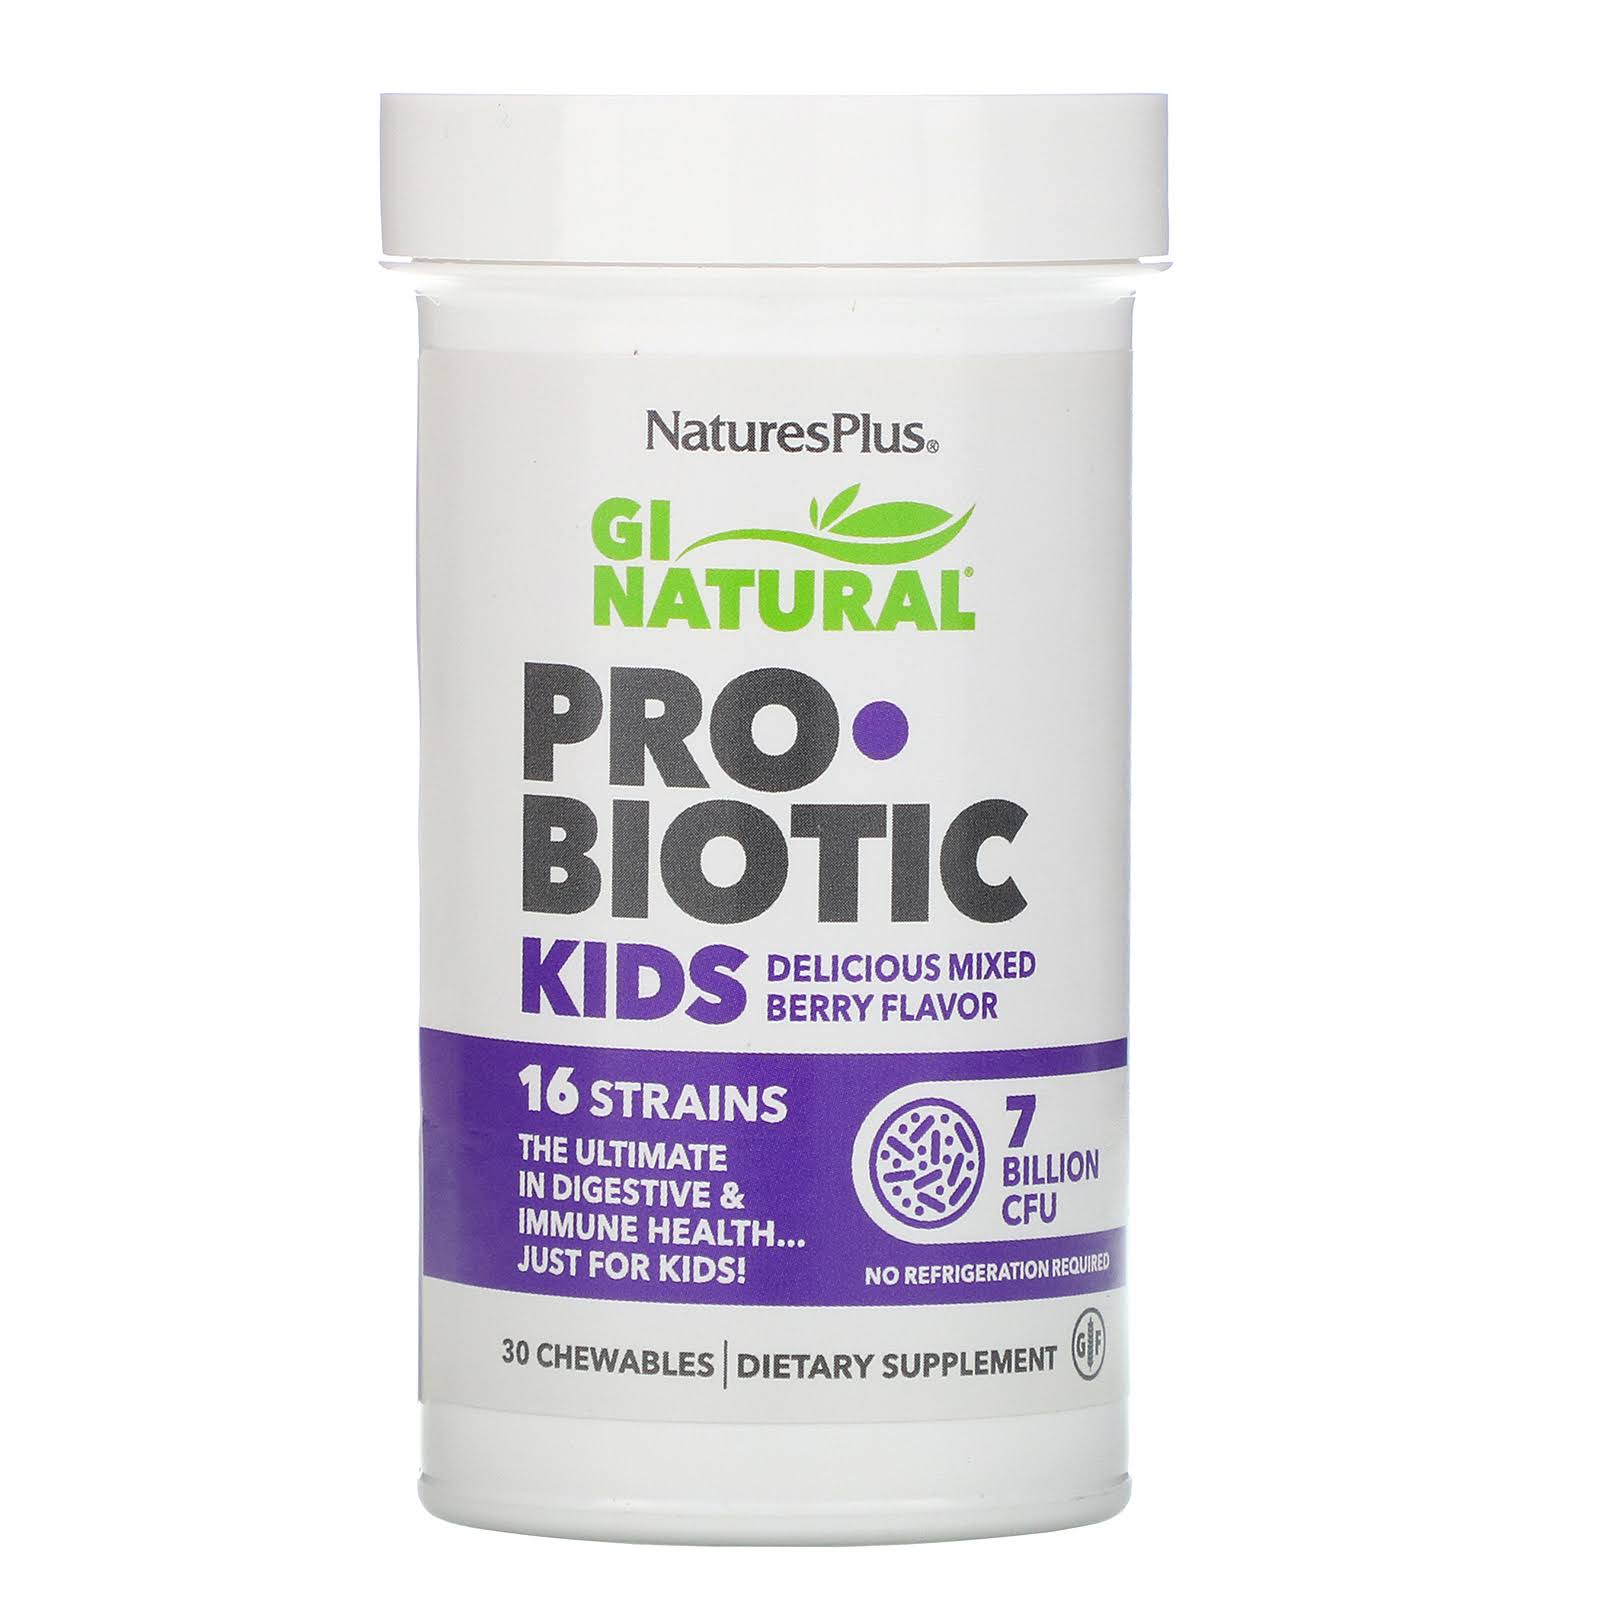 Natures Plus Gi Natural Kids Probiotic, Mixed Berry, 30 Chewables